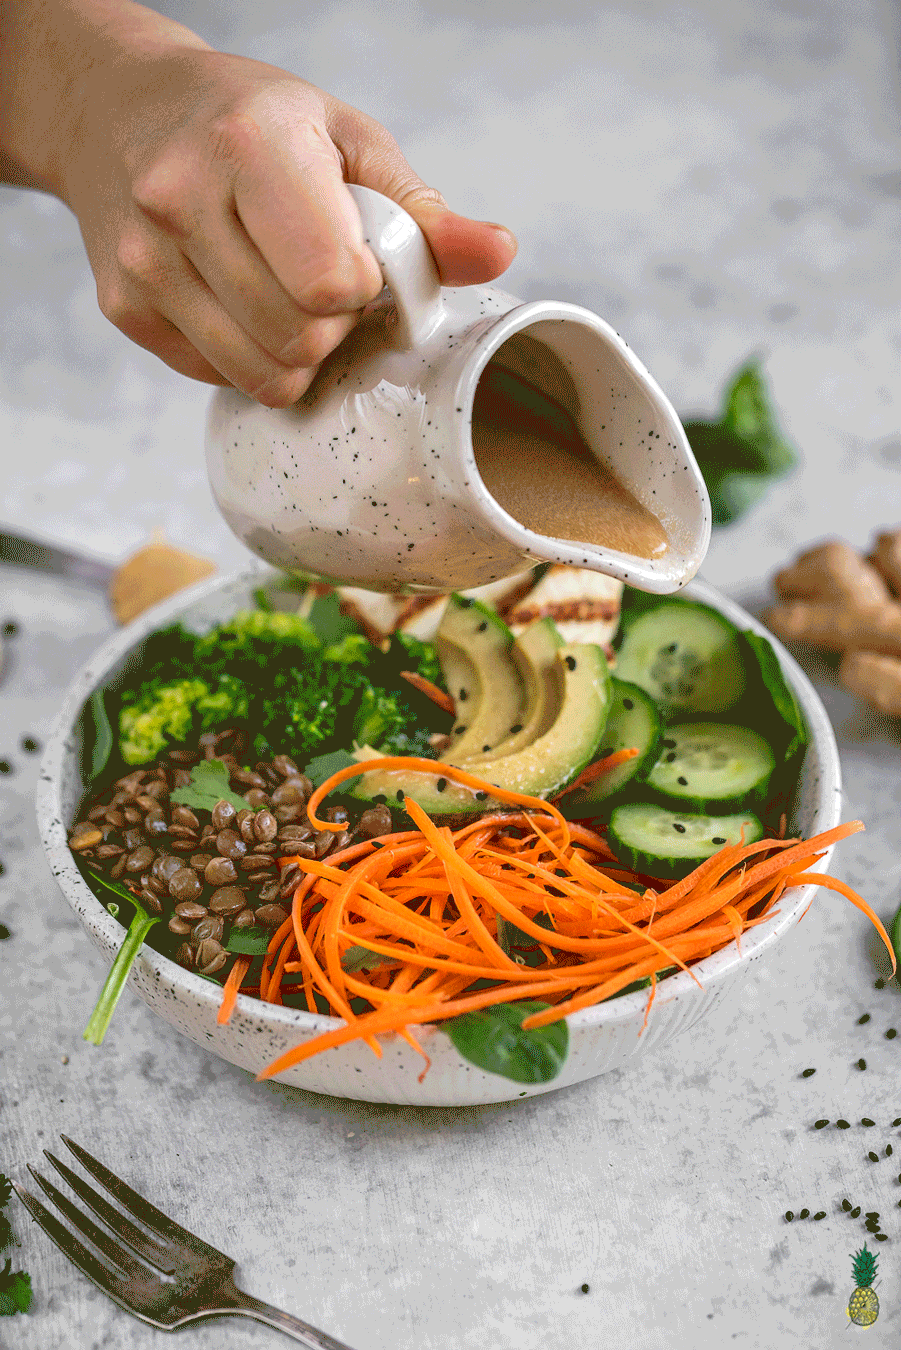 How To Make an Easy Ginger Miso Dressing | Only 7-Ingredients + Soy & Oil-Free! sweetsimplevegan.com #ginger #miso #dressing #vegan #oilfree #lowfat #easy #salad #asian